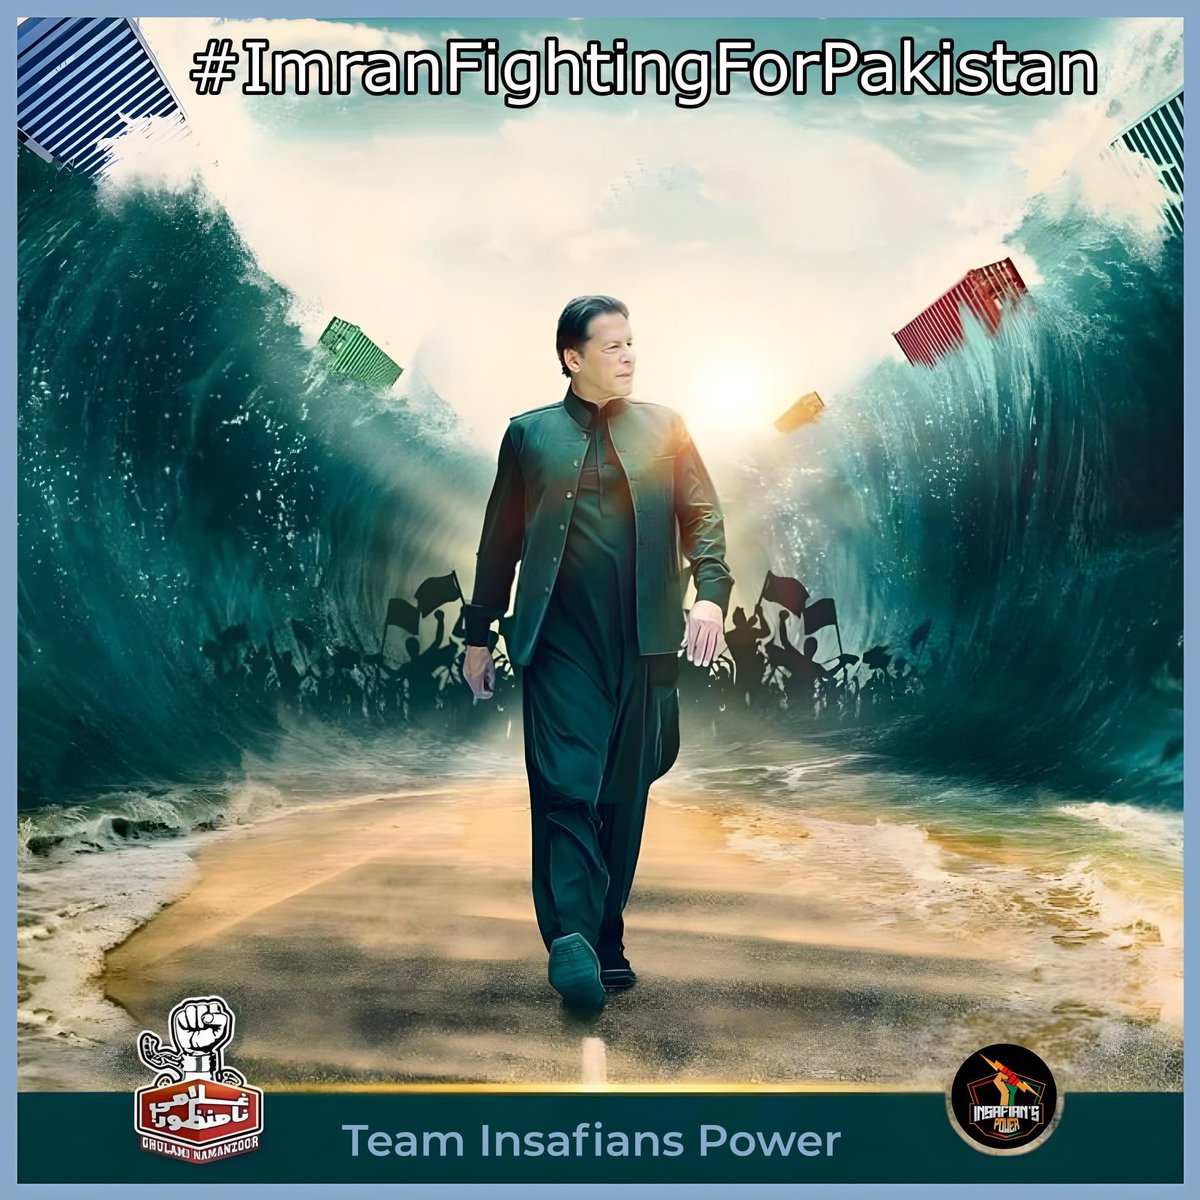 The strength and perseverance of Imran Khan Khan are a beacon of hope for all those who strive for a better future. #InspirationalLeader
@TeamiPians
#ImranFightingForPakistan